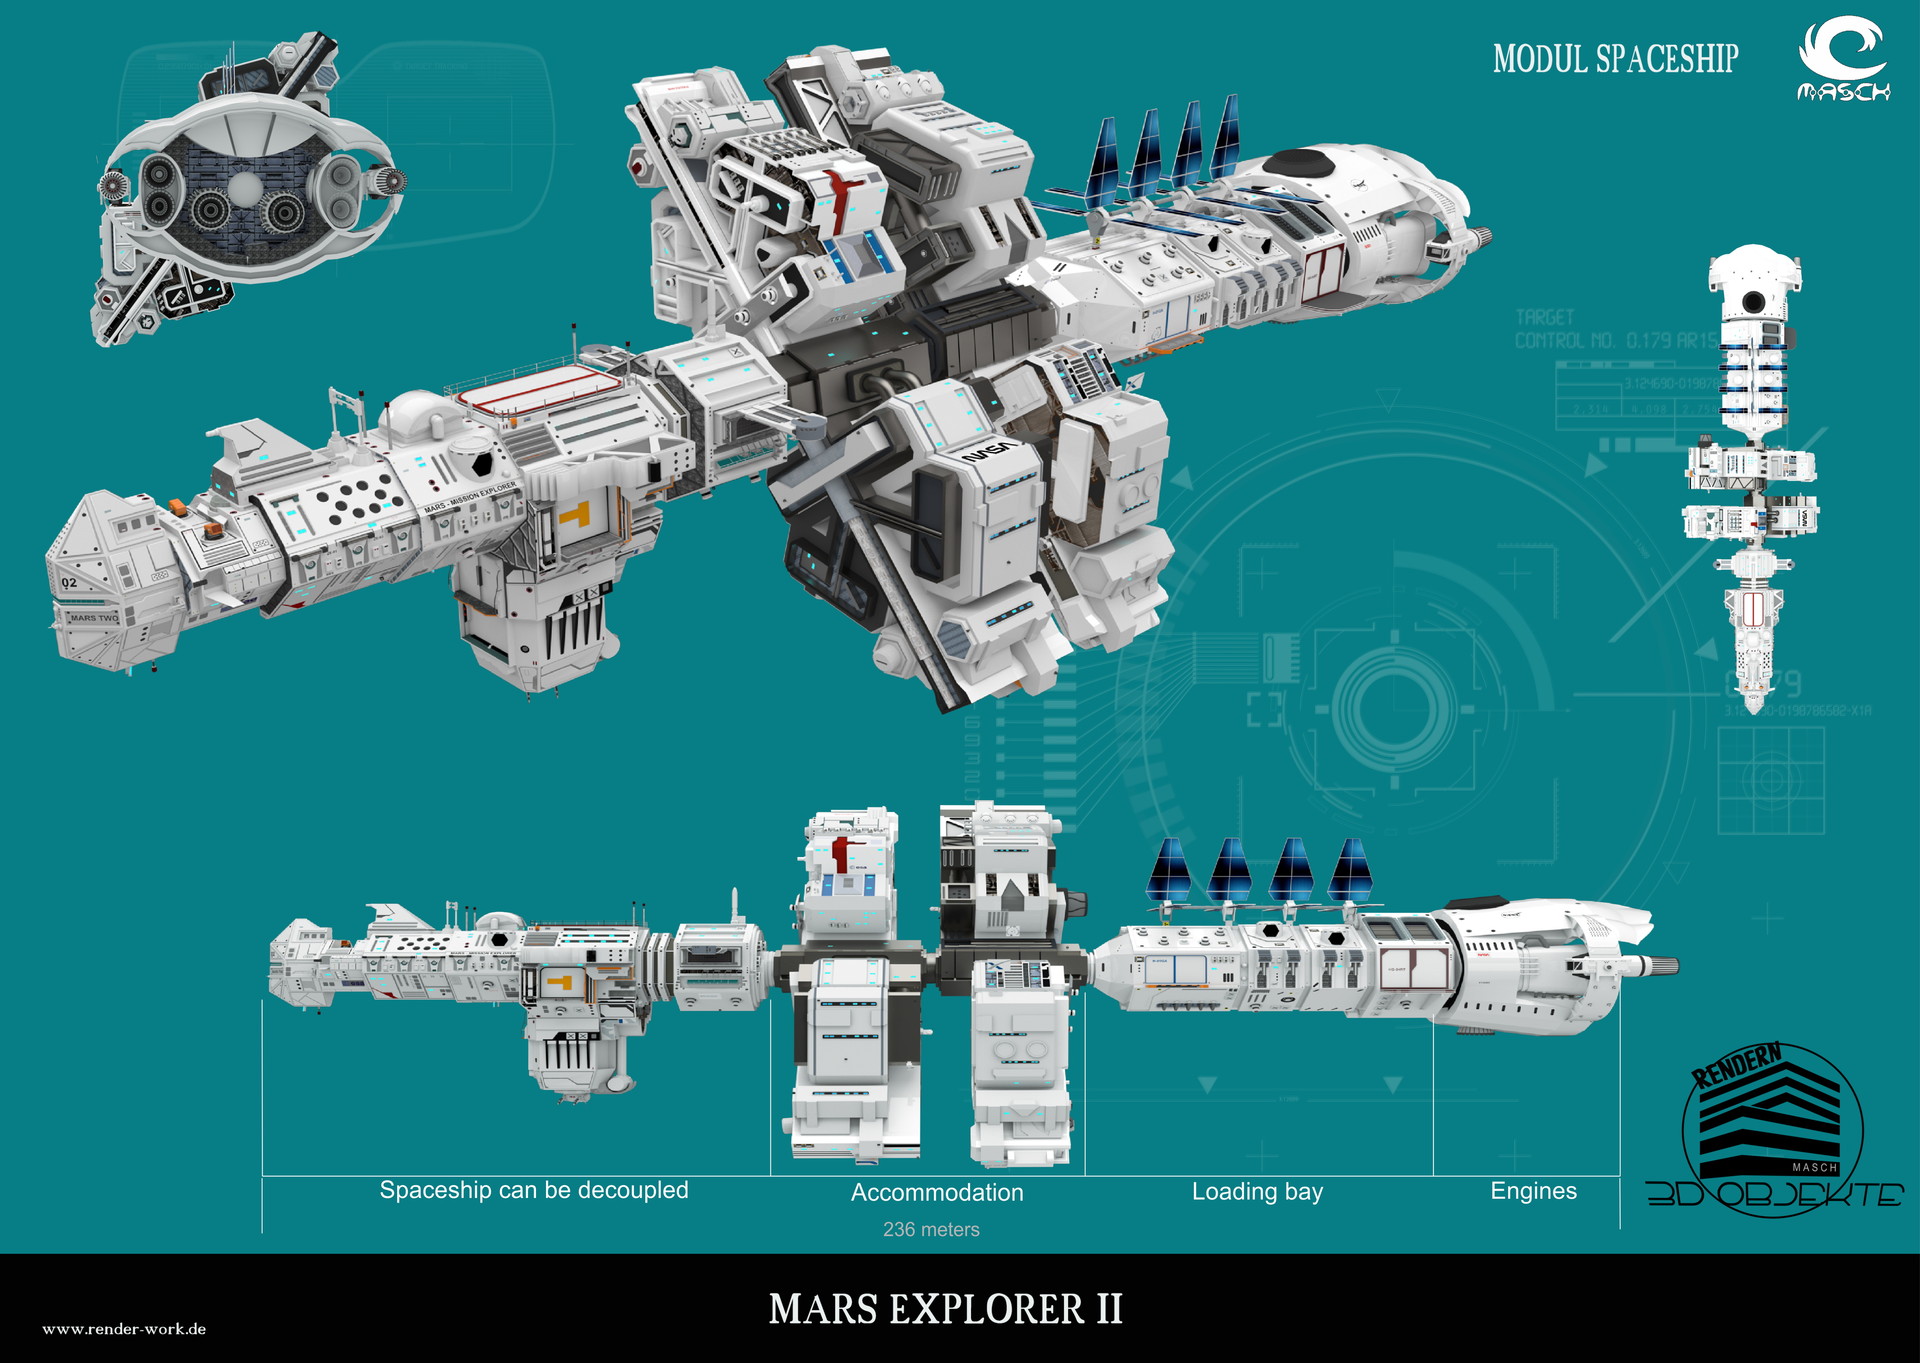 ArtStation - Early sketch for : Mars Project The New Explorers